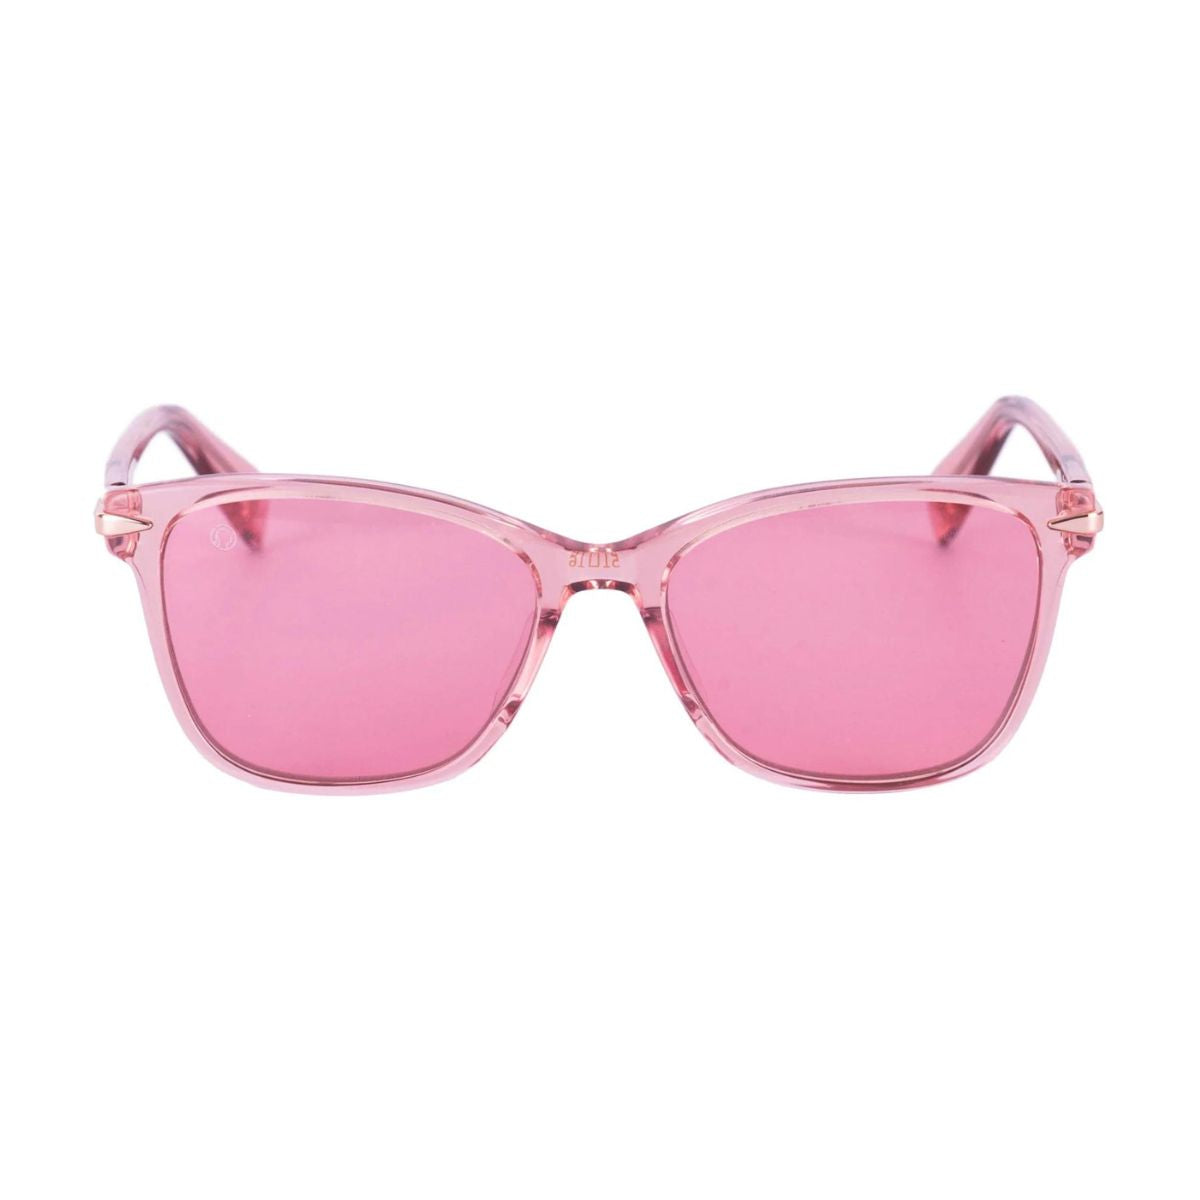 "Buy The Monk Florence N C4 UV Protected Sunglass For Women's At Optorium"